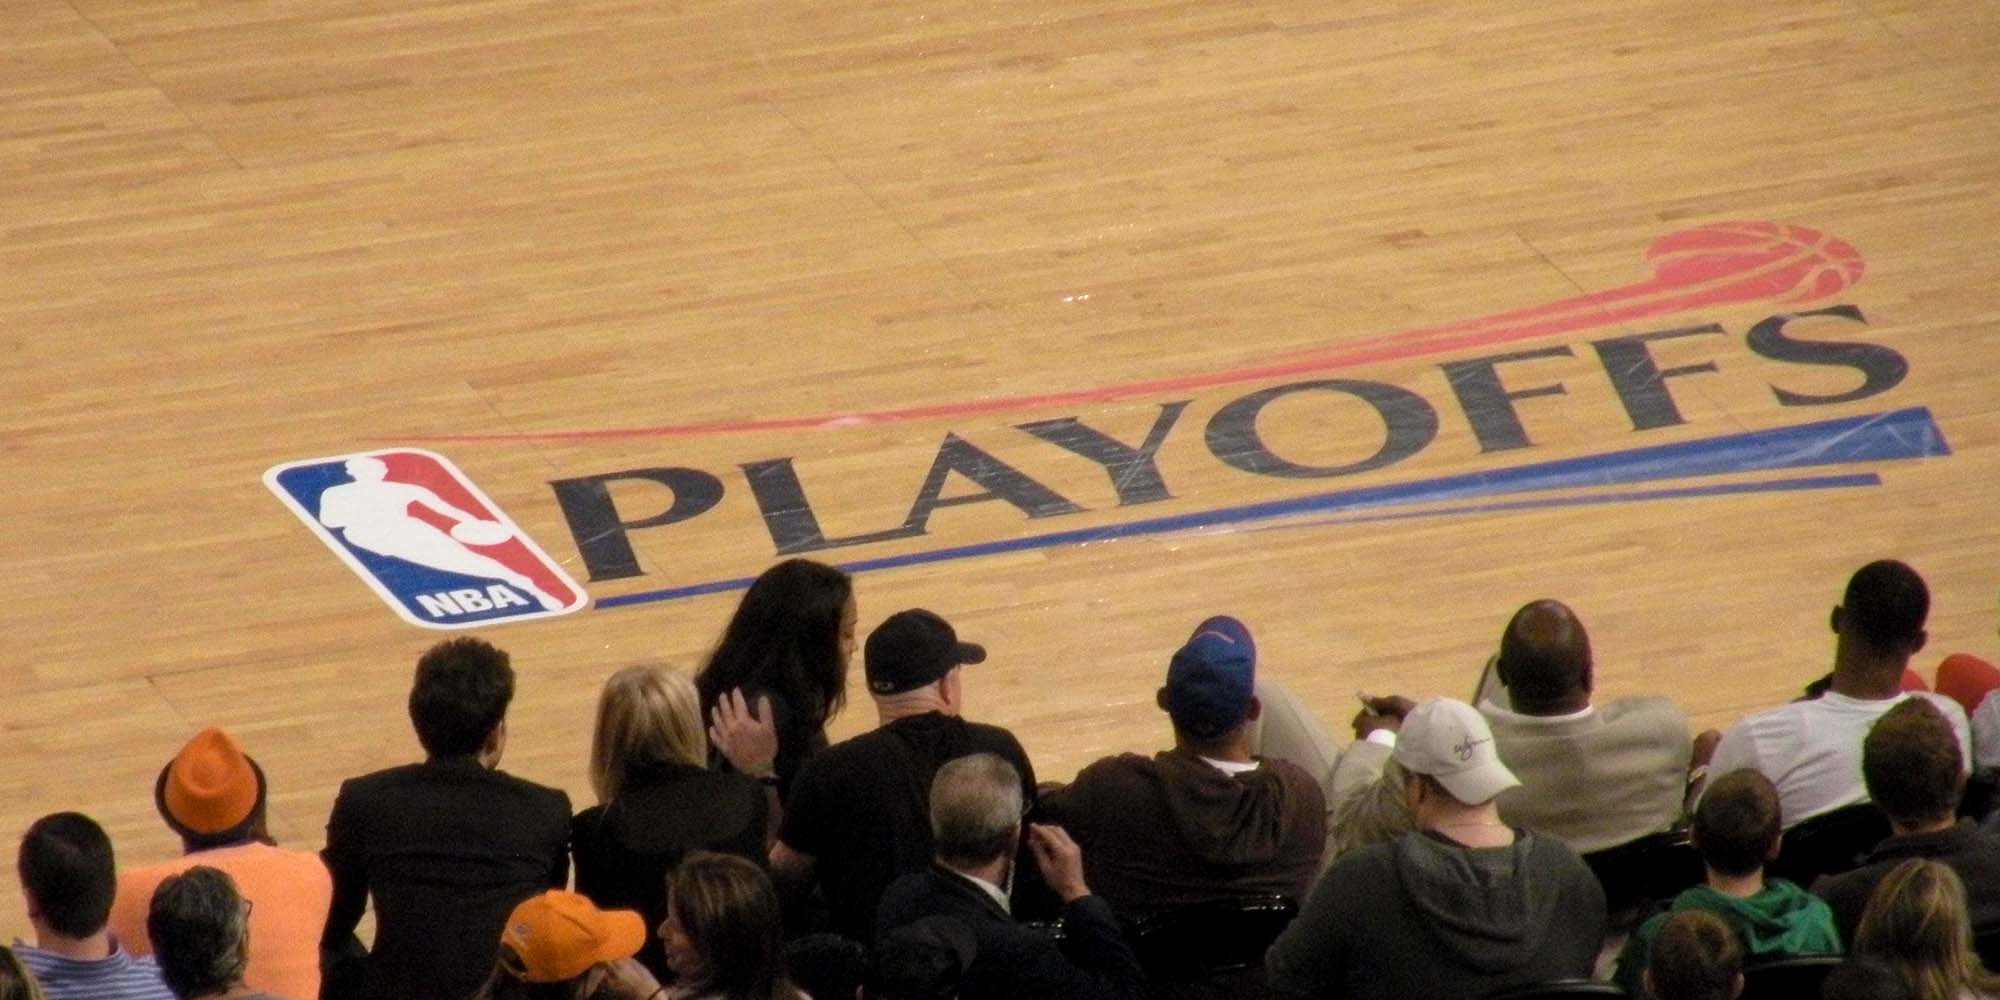 How Much Are Tickets For  Courtside Seats At NBA Games?